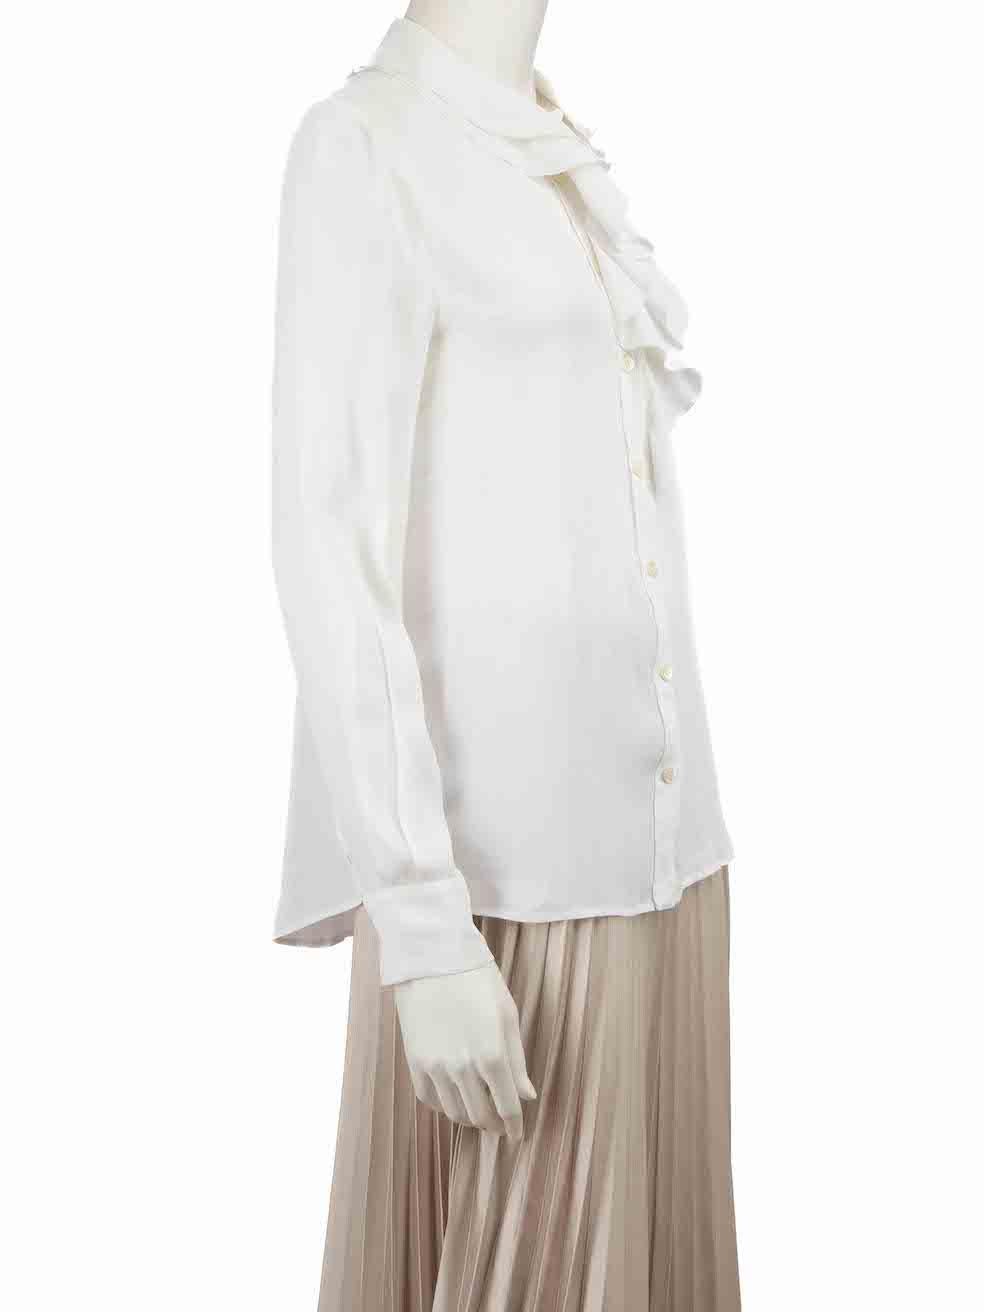 CONDITION is Very good. Minimal wear to shirt is evident. Minimal wear to the front with warping to the weave on this used Moschino Boutique designer resale item.
 
 Details
 White
 Rayon
 Blouse
 Sheer
 Button up fastening
 Rufle detail
 Long